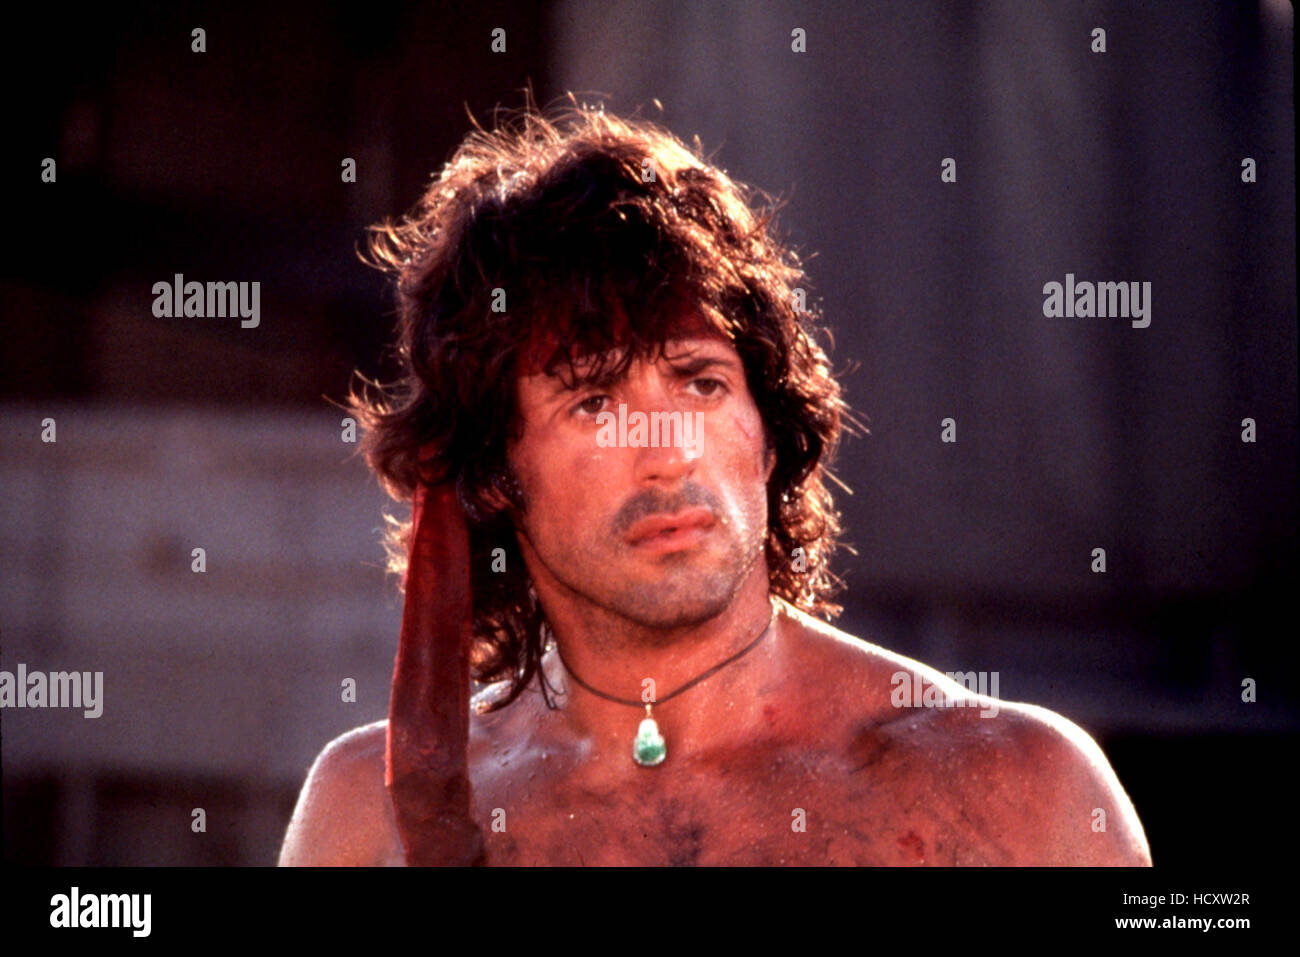 RAMBO : First Blood Part II, Sylvester Stallone, 1985). ©TriStar  Pictures/avec la permission d'Everett Collection Photo Stock - Alamy